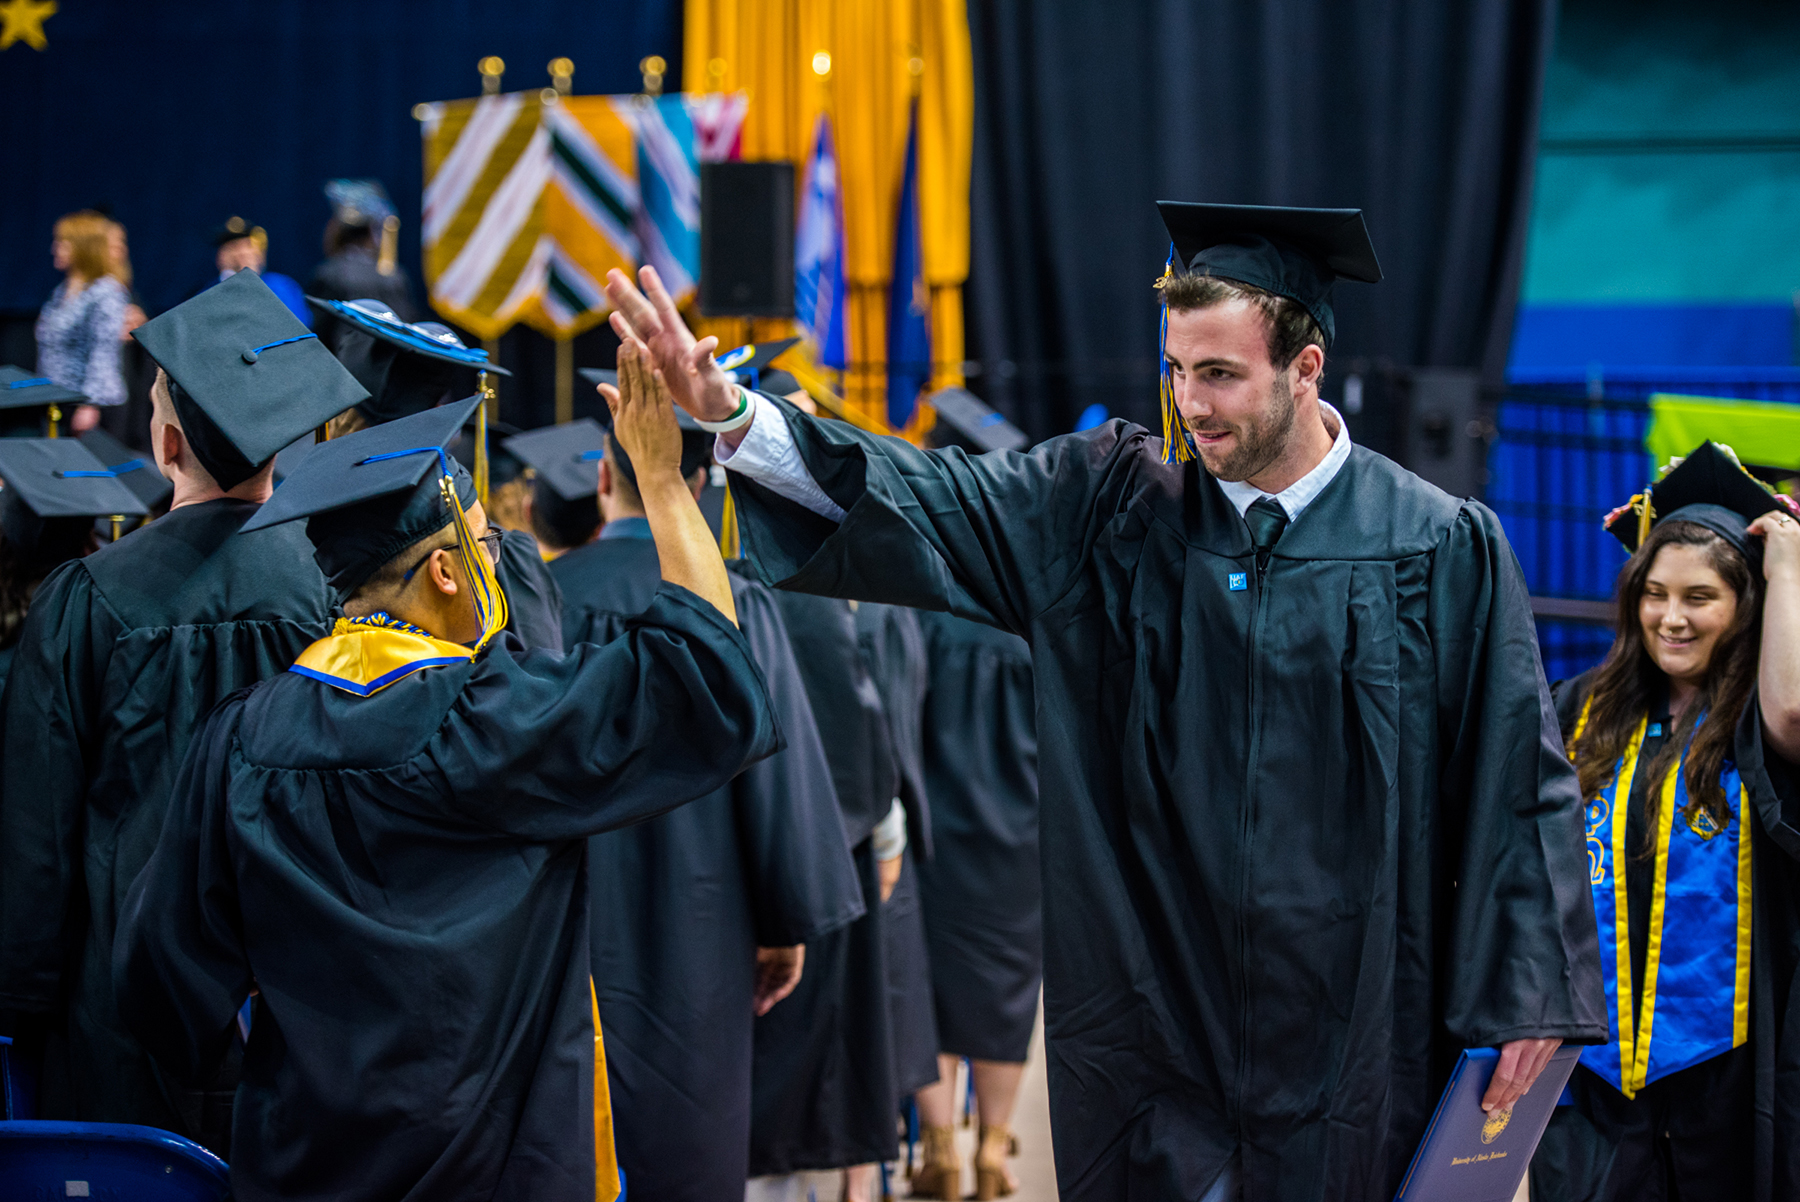 UAF Film graduate Mark Stoller high fives Daniel Nero after both Nero and Stoller received their diplomas at Commencement 2017. | UAF Photo by Zayn Roohi